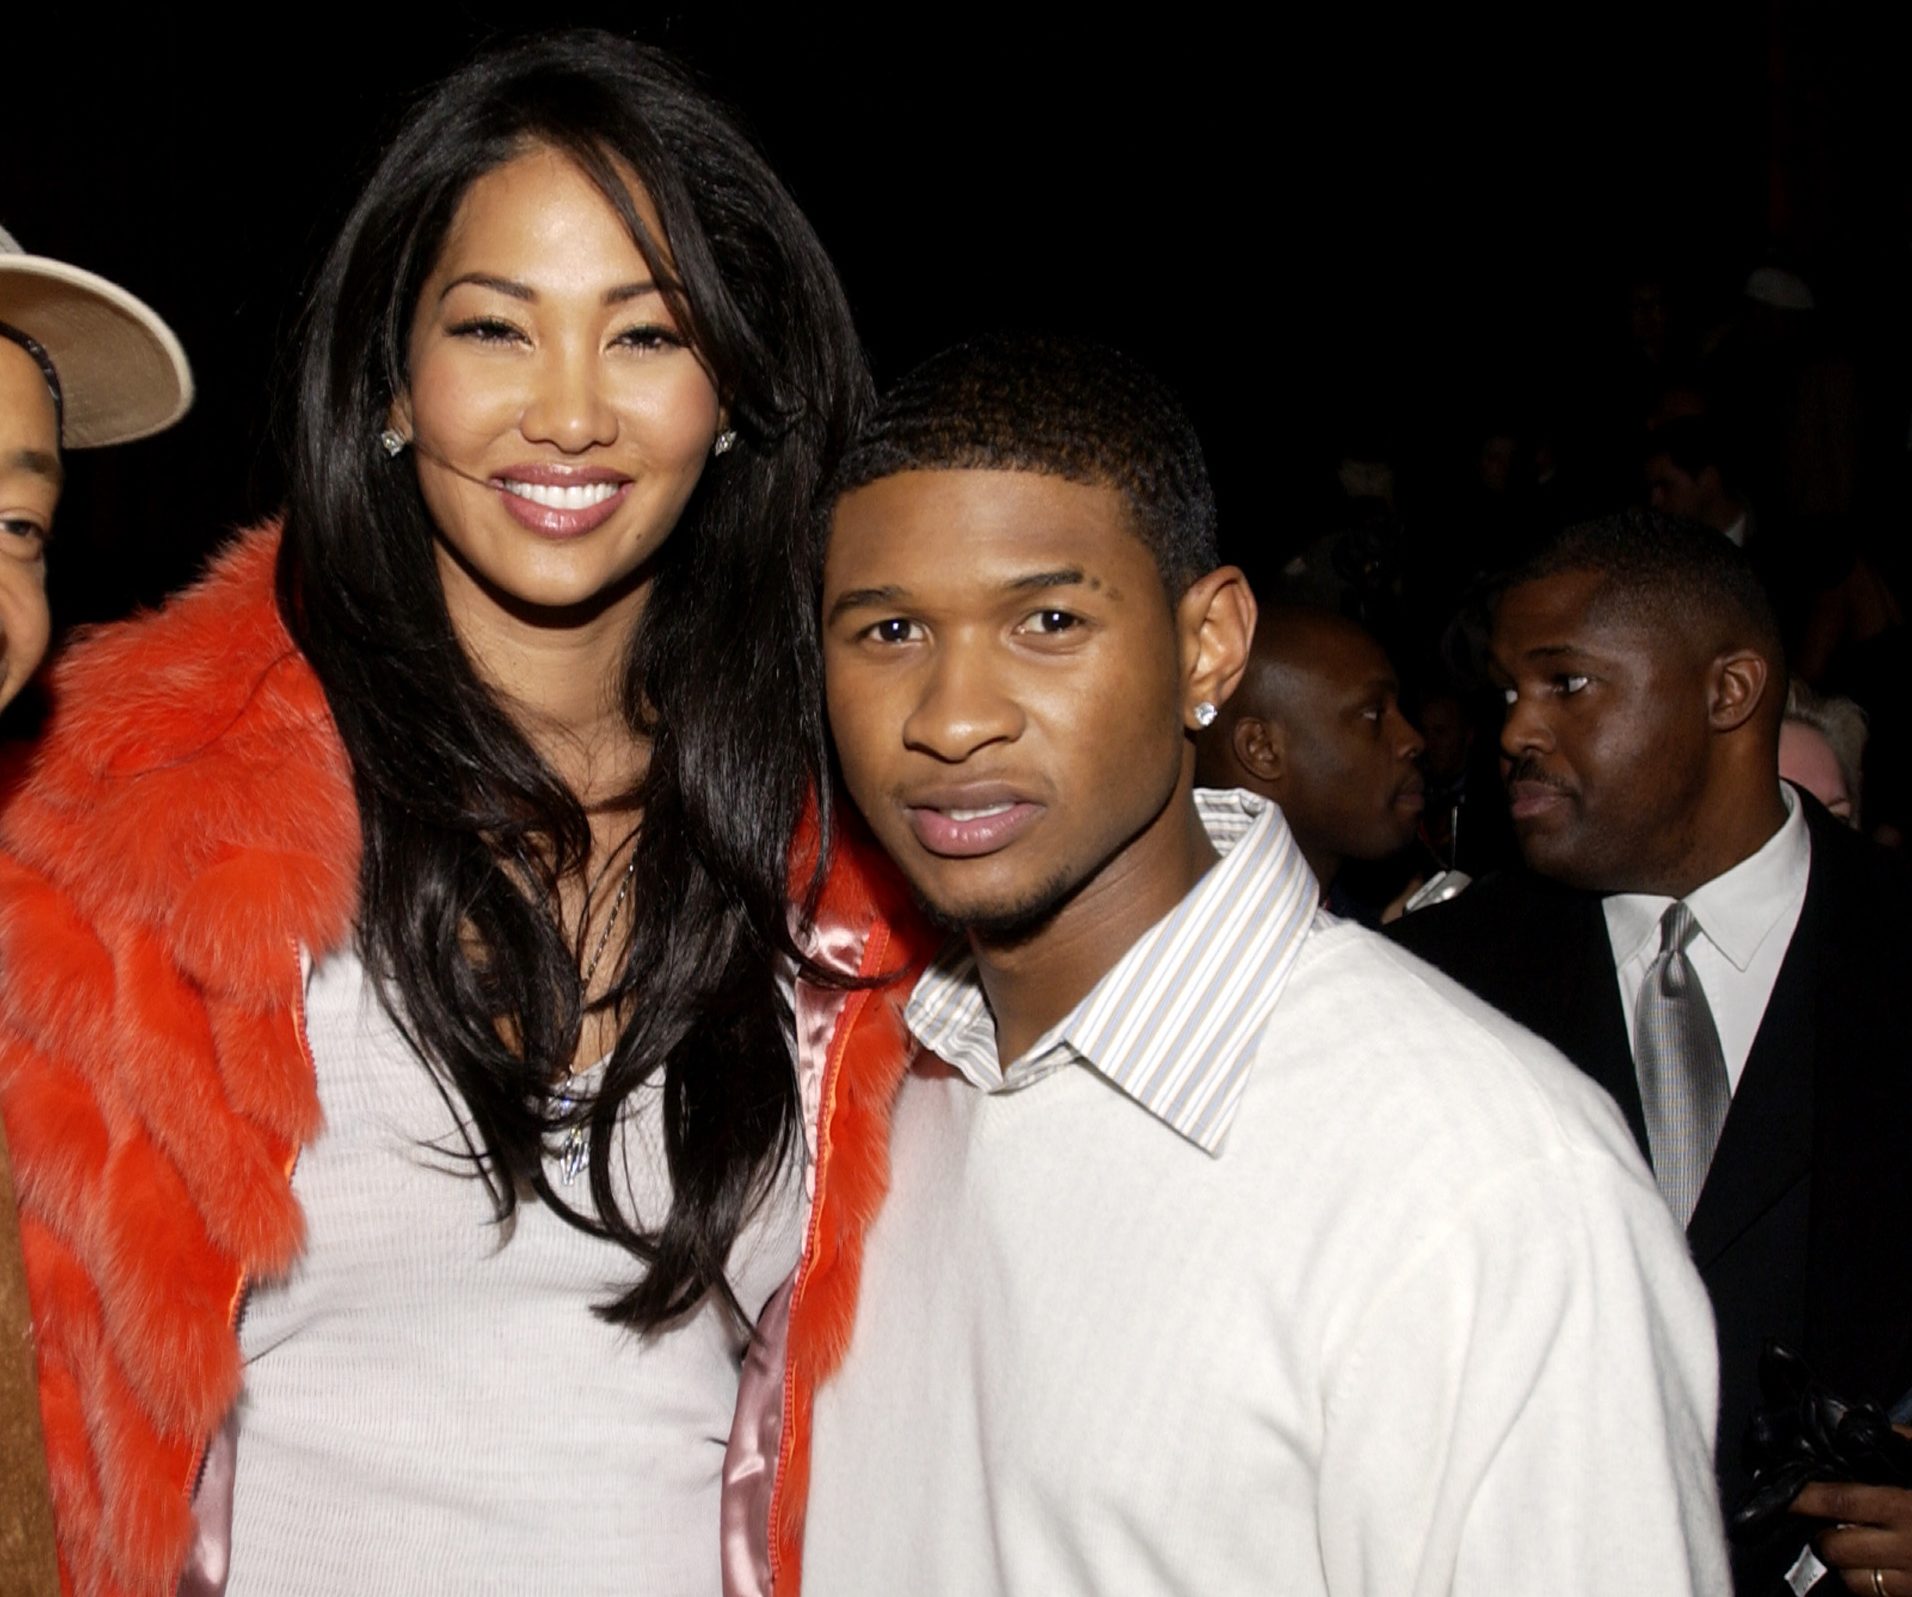 Usher Gets Up Close & Personal With Kimora Lee Simmons During Las Vegas Residency: Watch